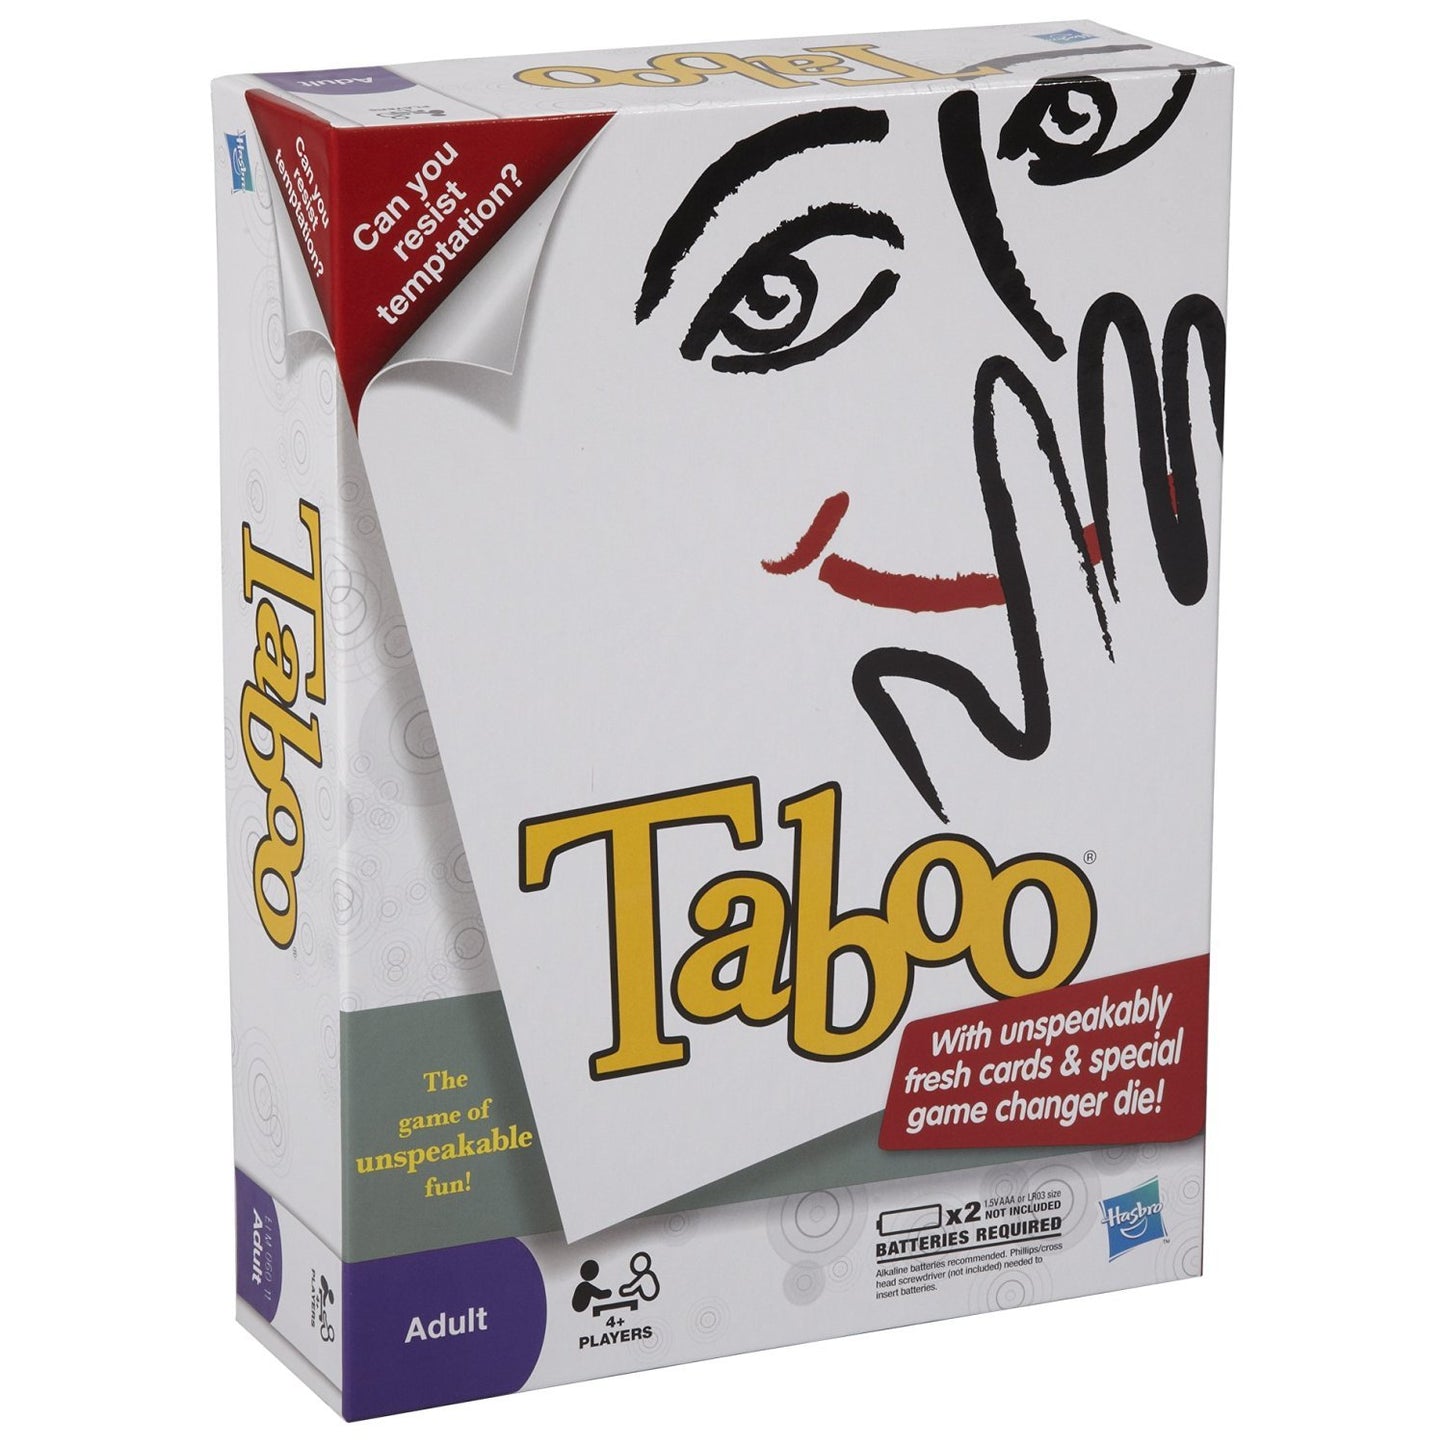 Taboo The Game of Unspeakable Fun with Fresh Cards & Special Game Changer Die Board Game